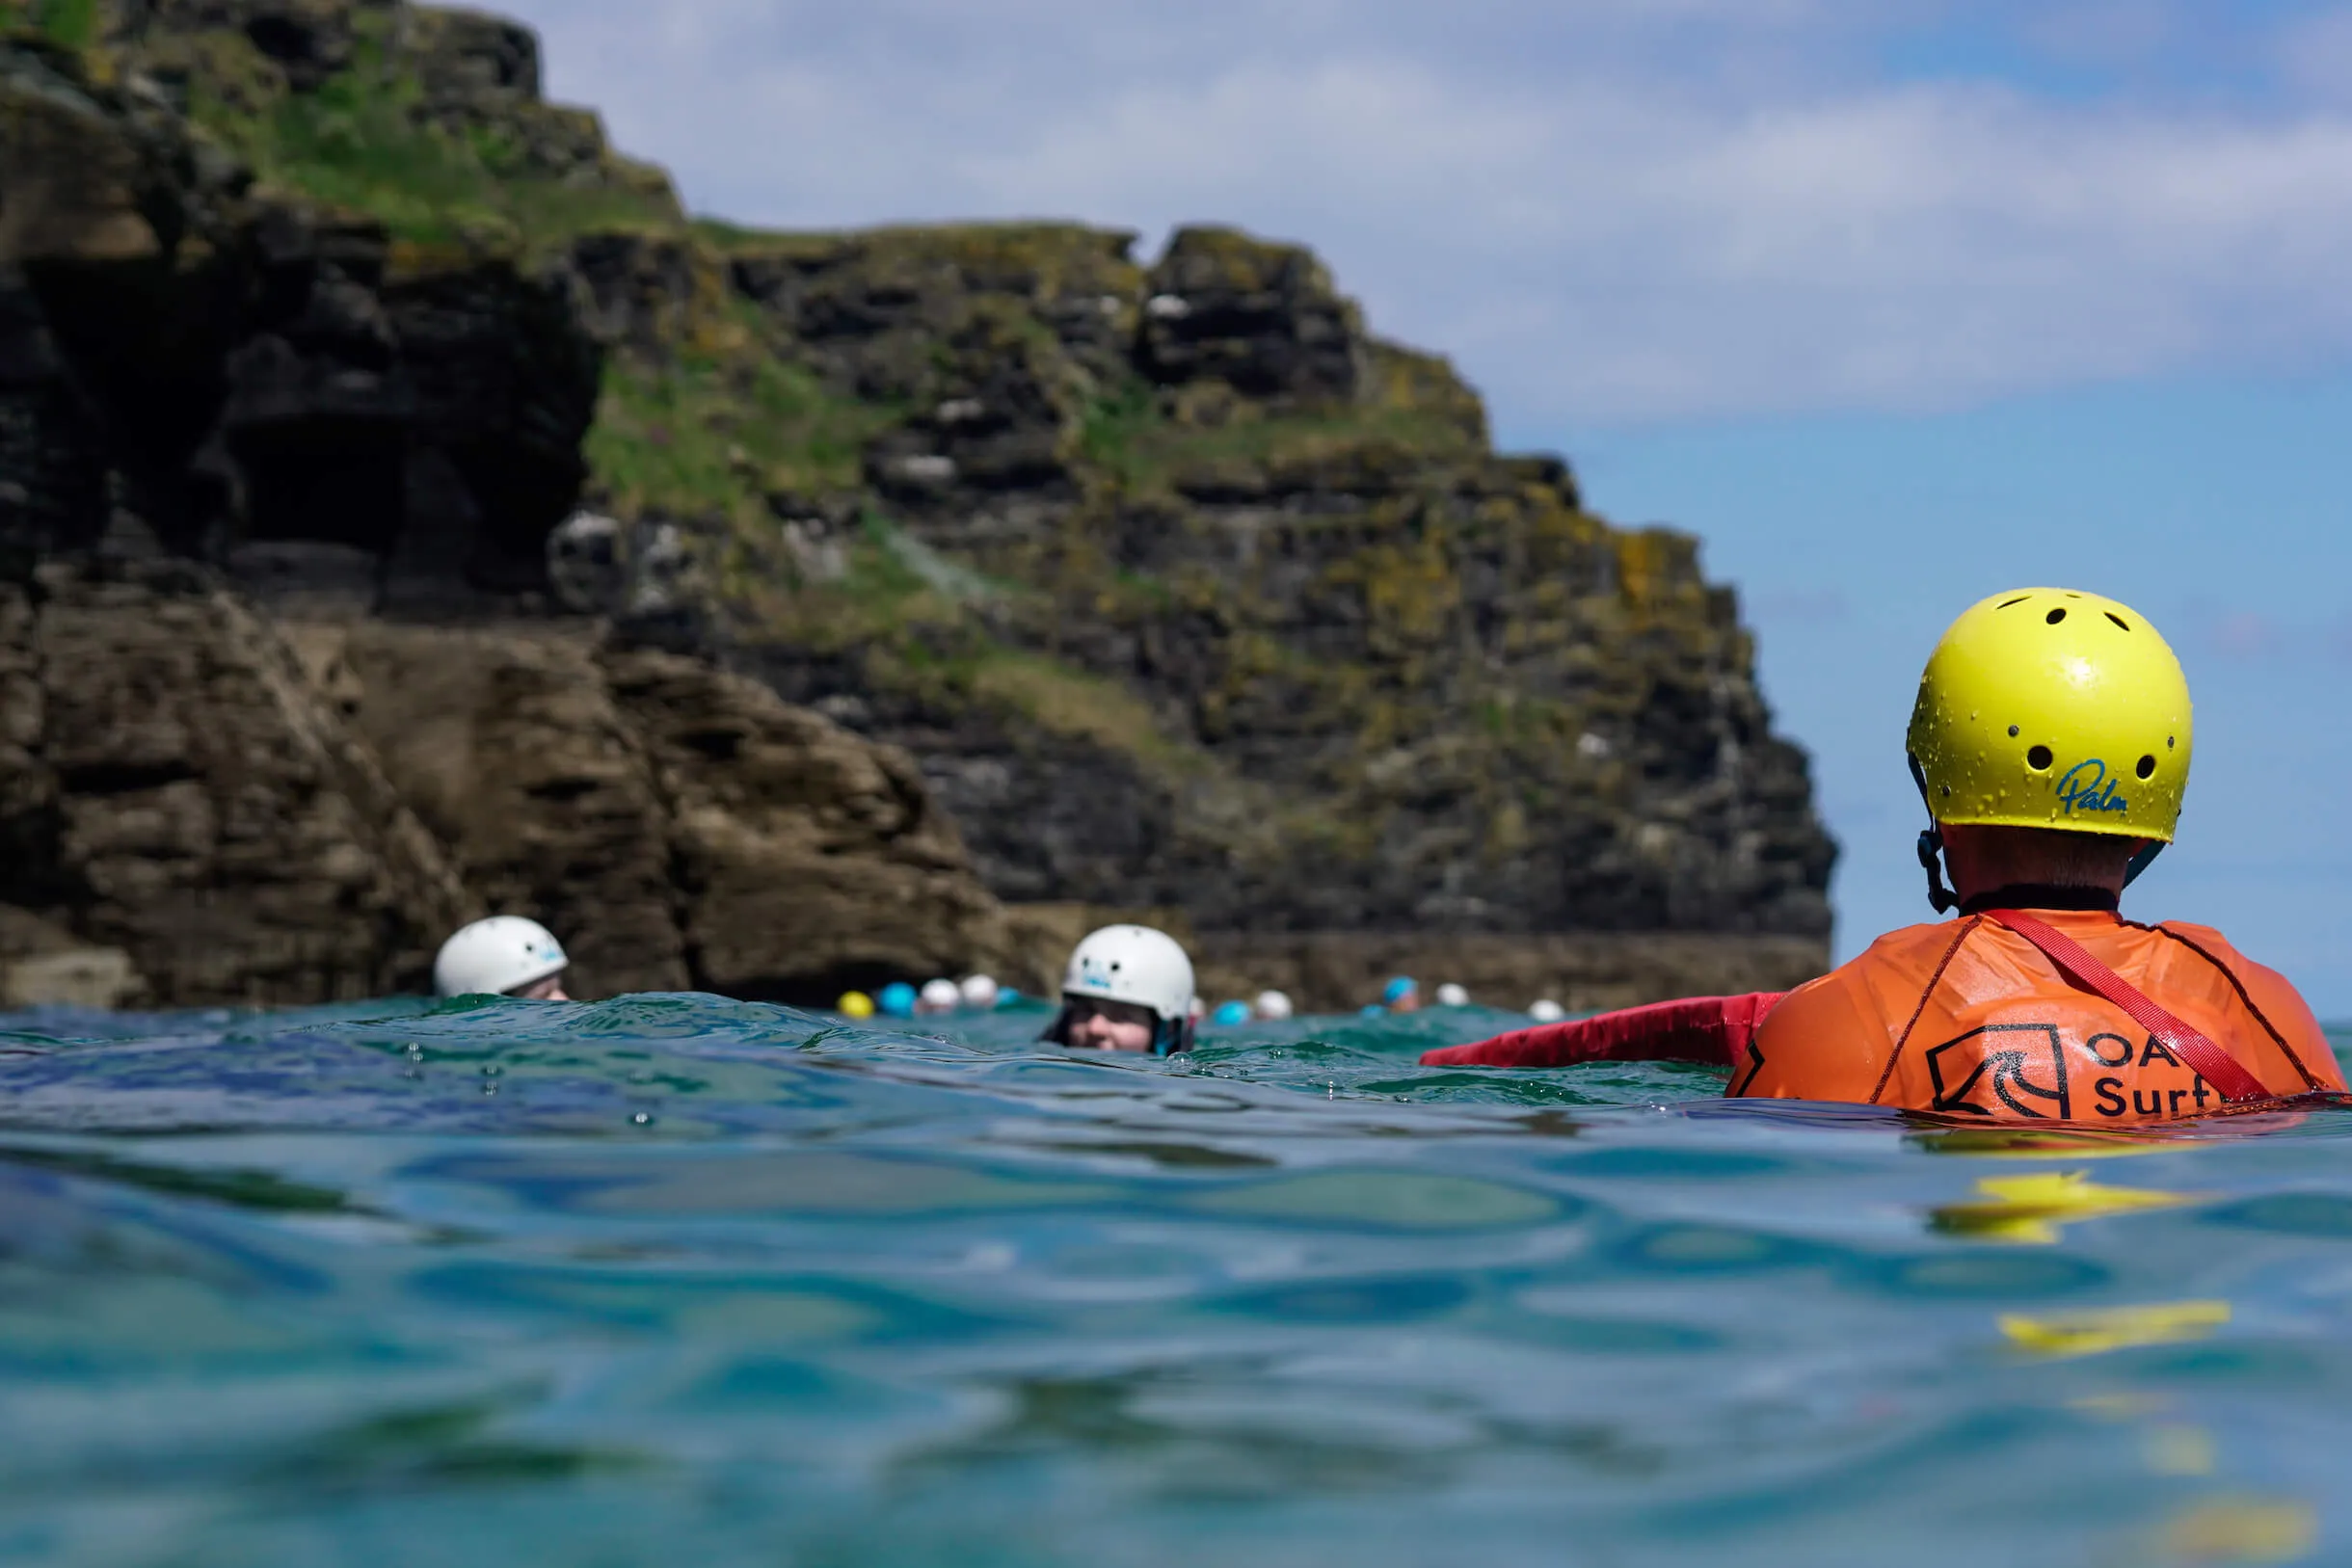 coasteering session on a school residential